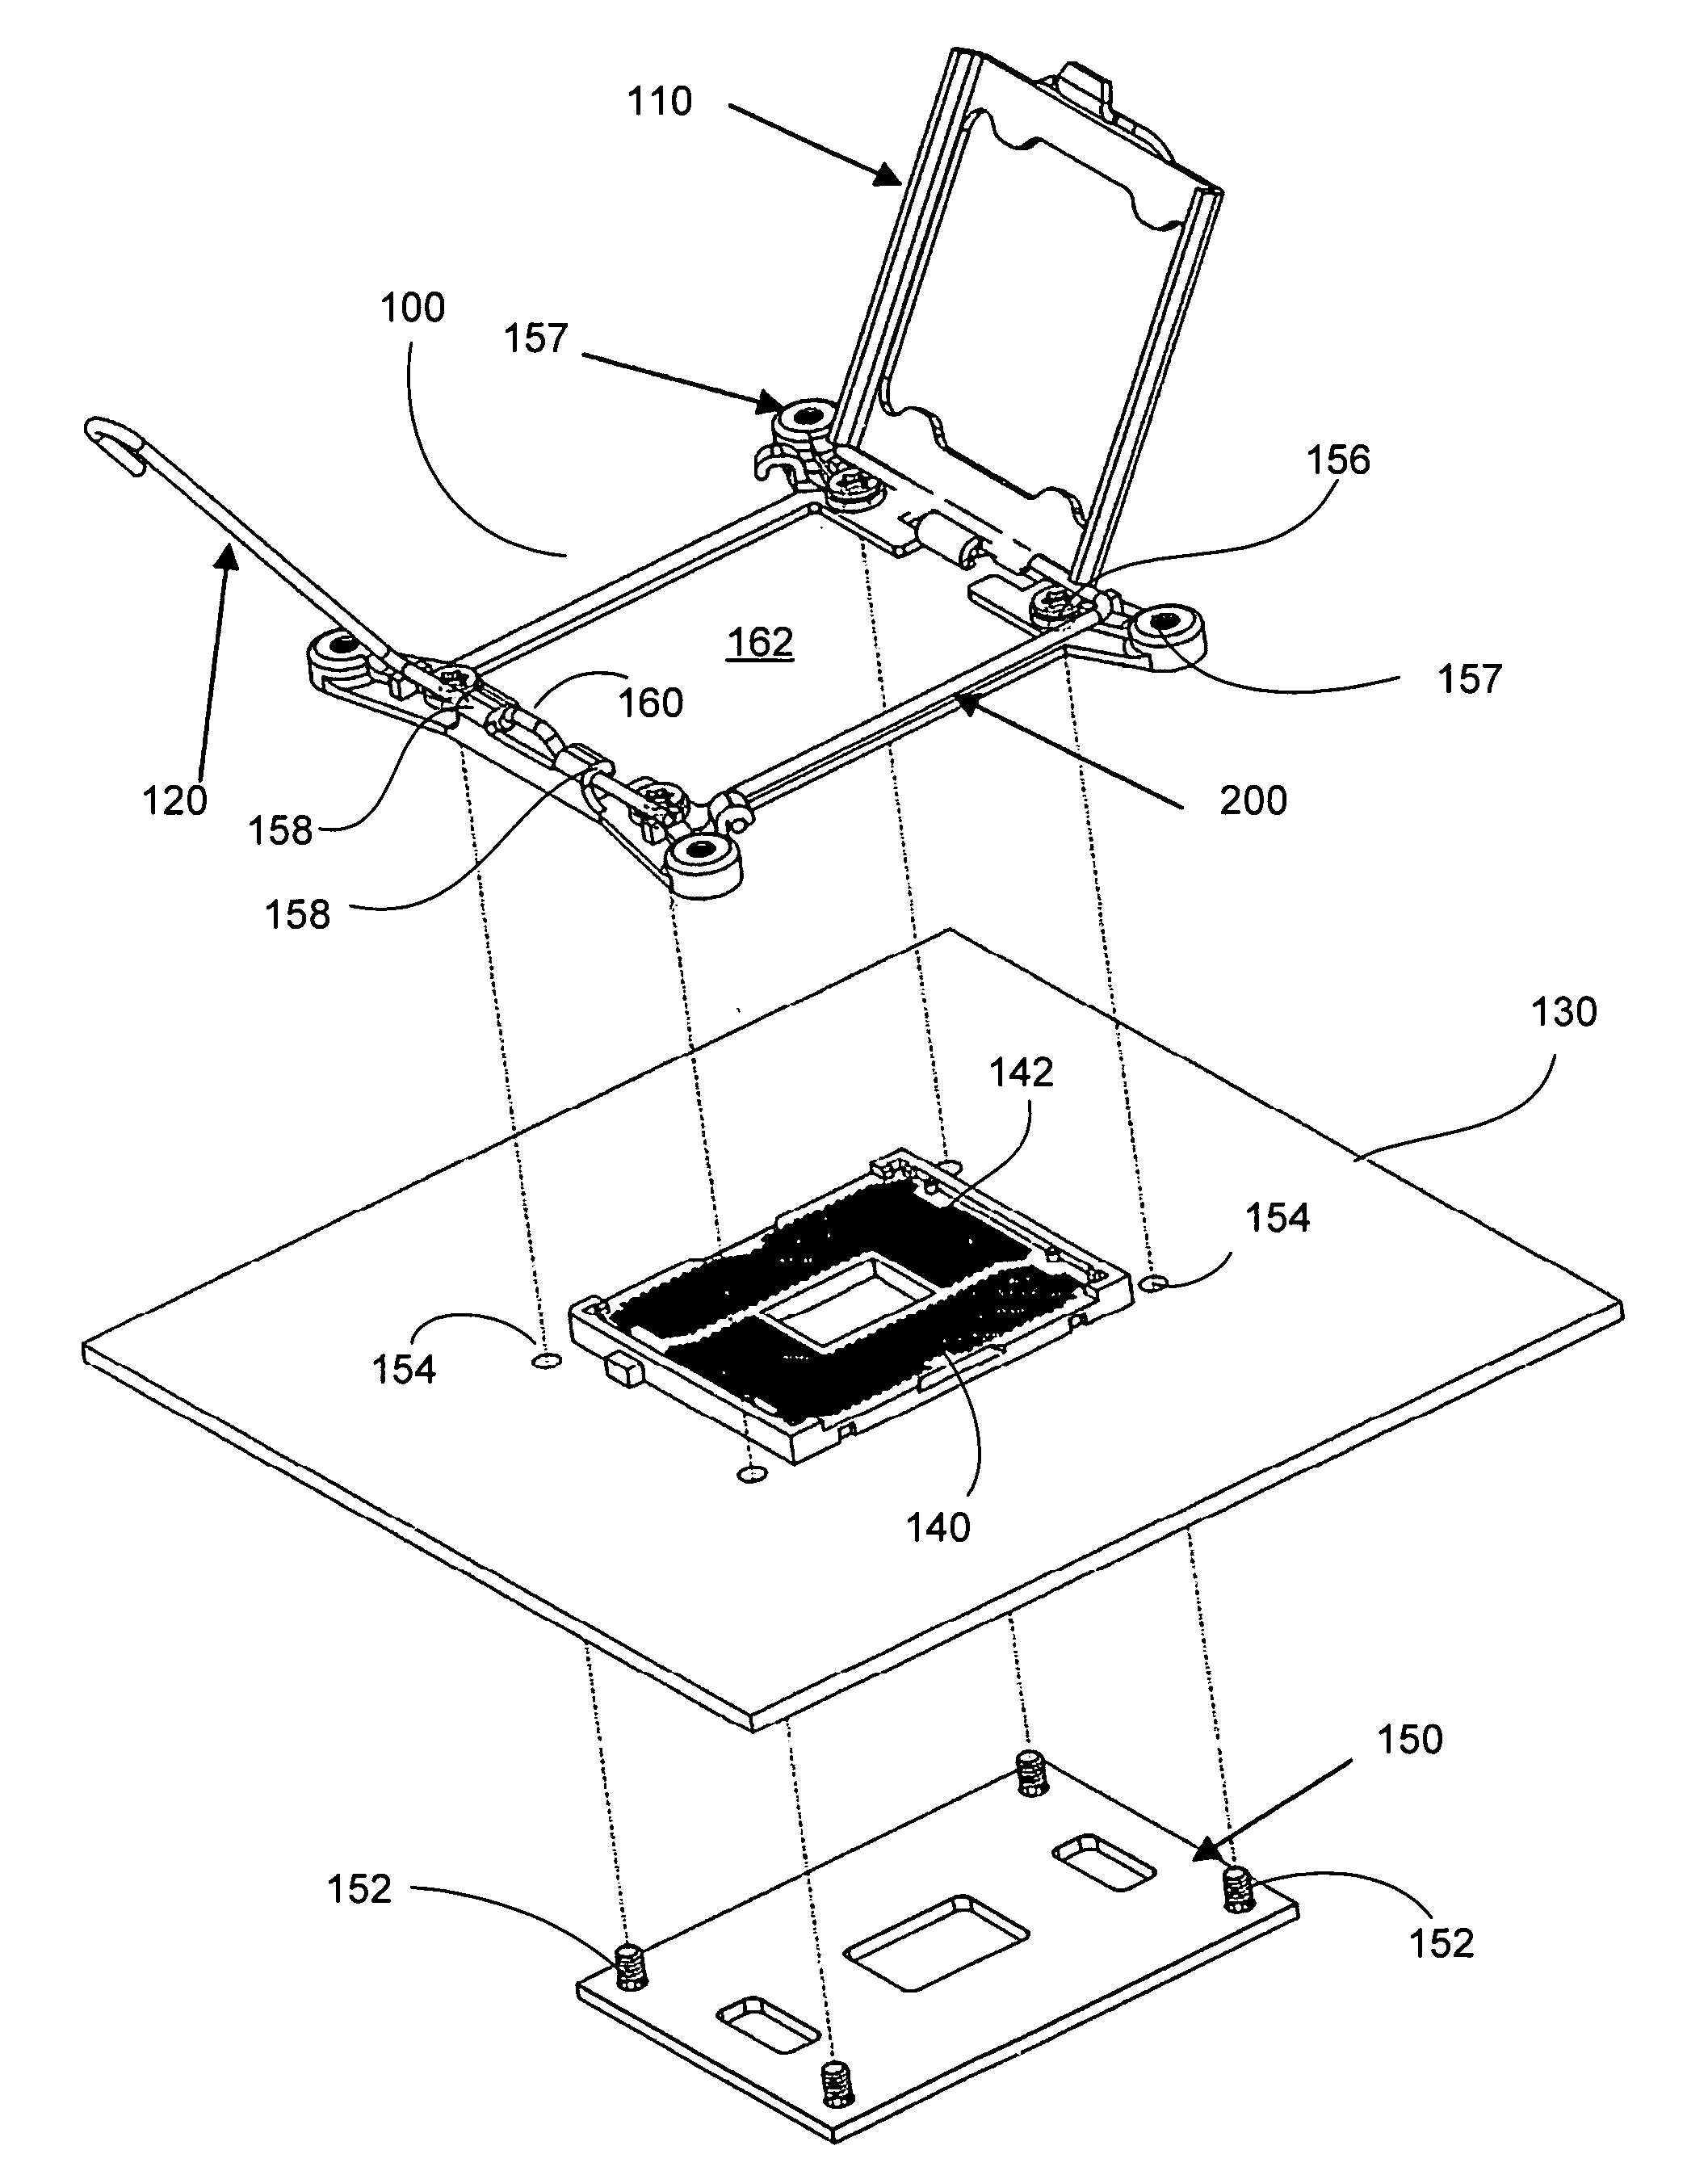 Unified retention mechanism for CPU/socket Loading and thermal solution attach